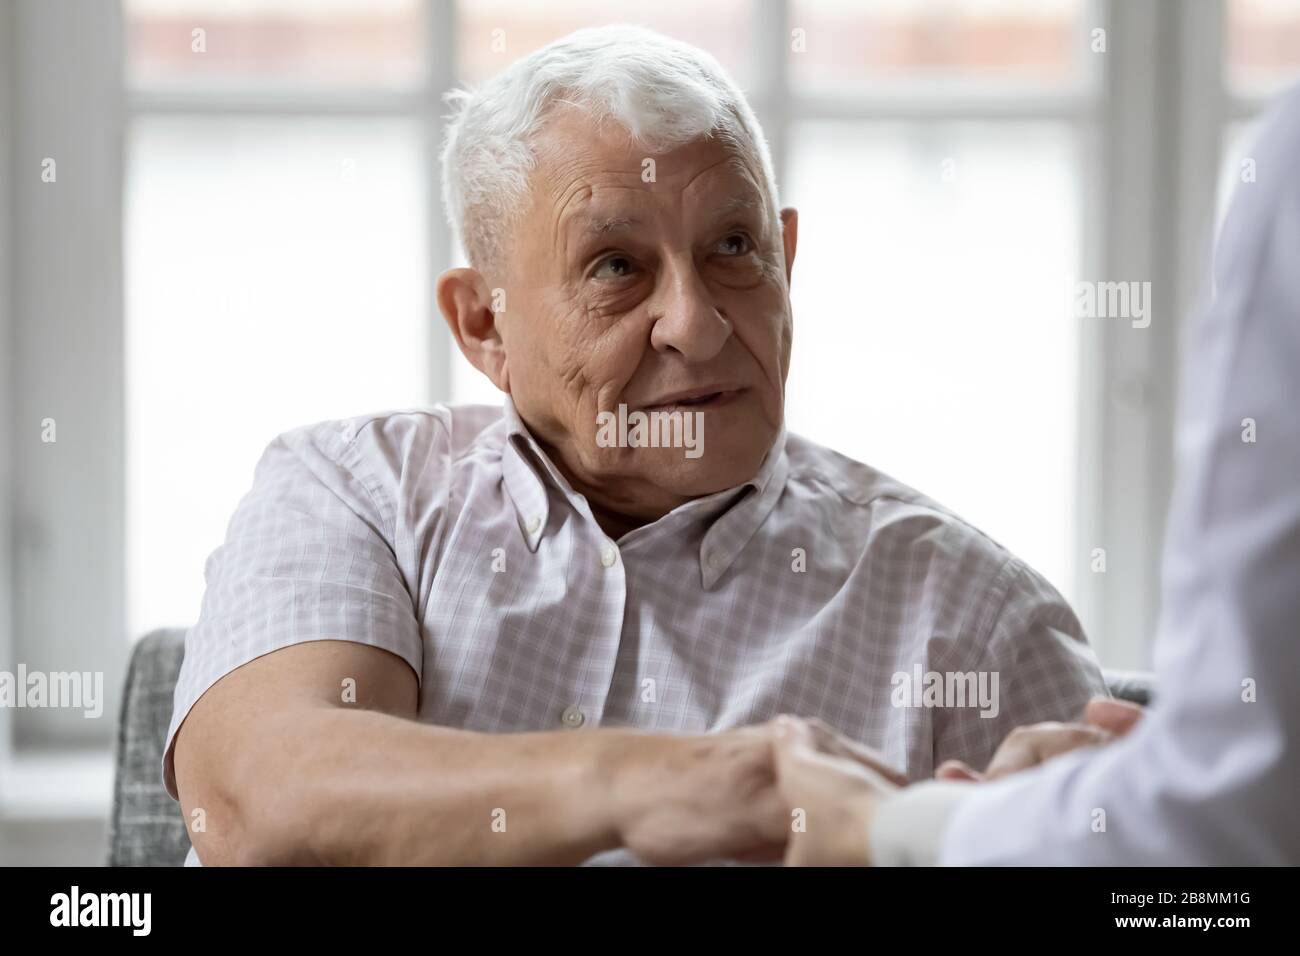 Woman nurse holding hands of elderly man showing care Stock Photo